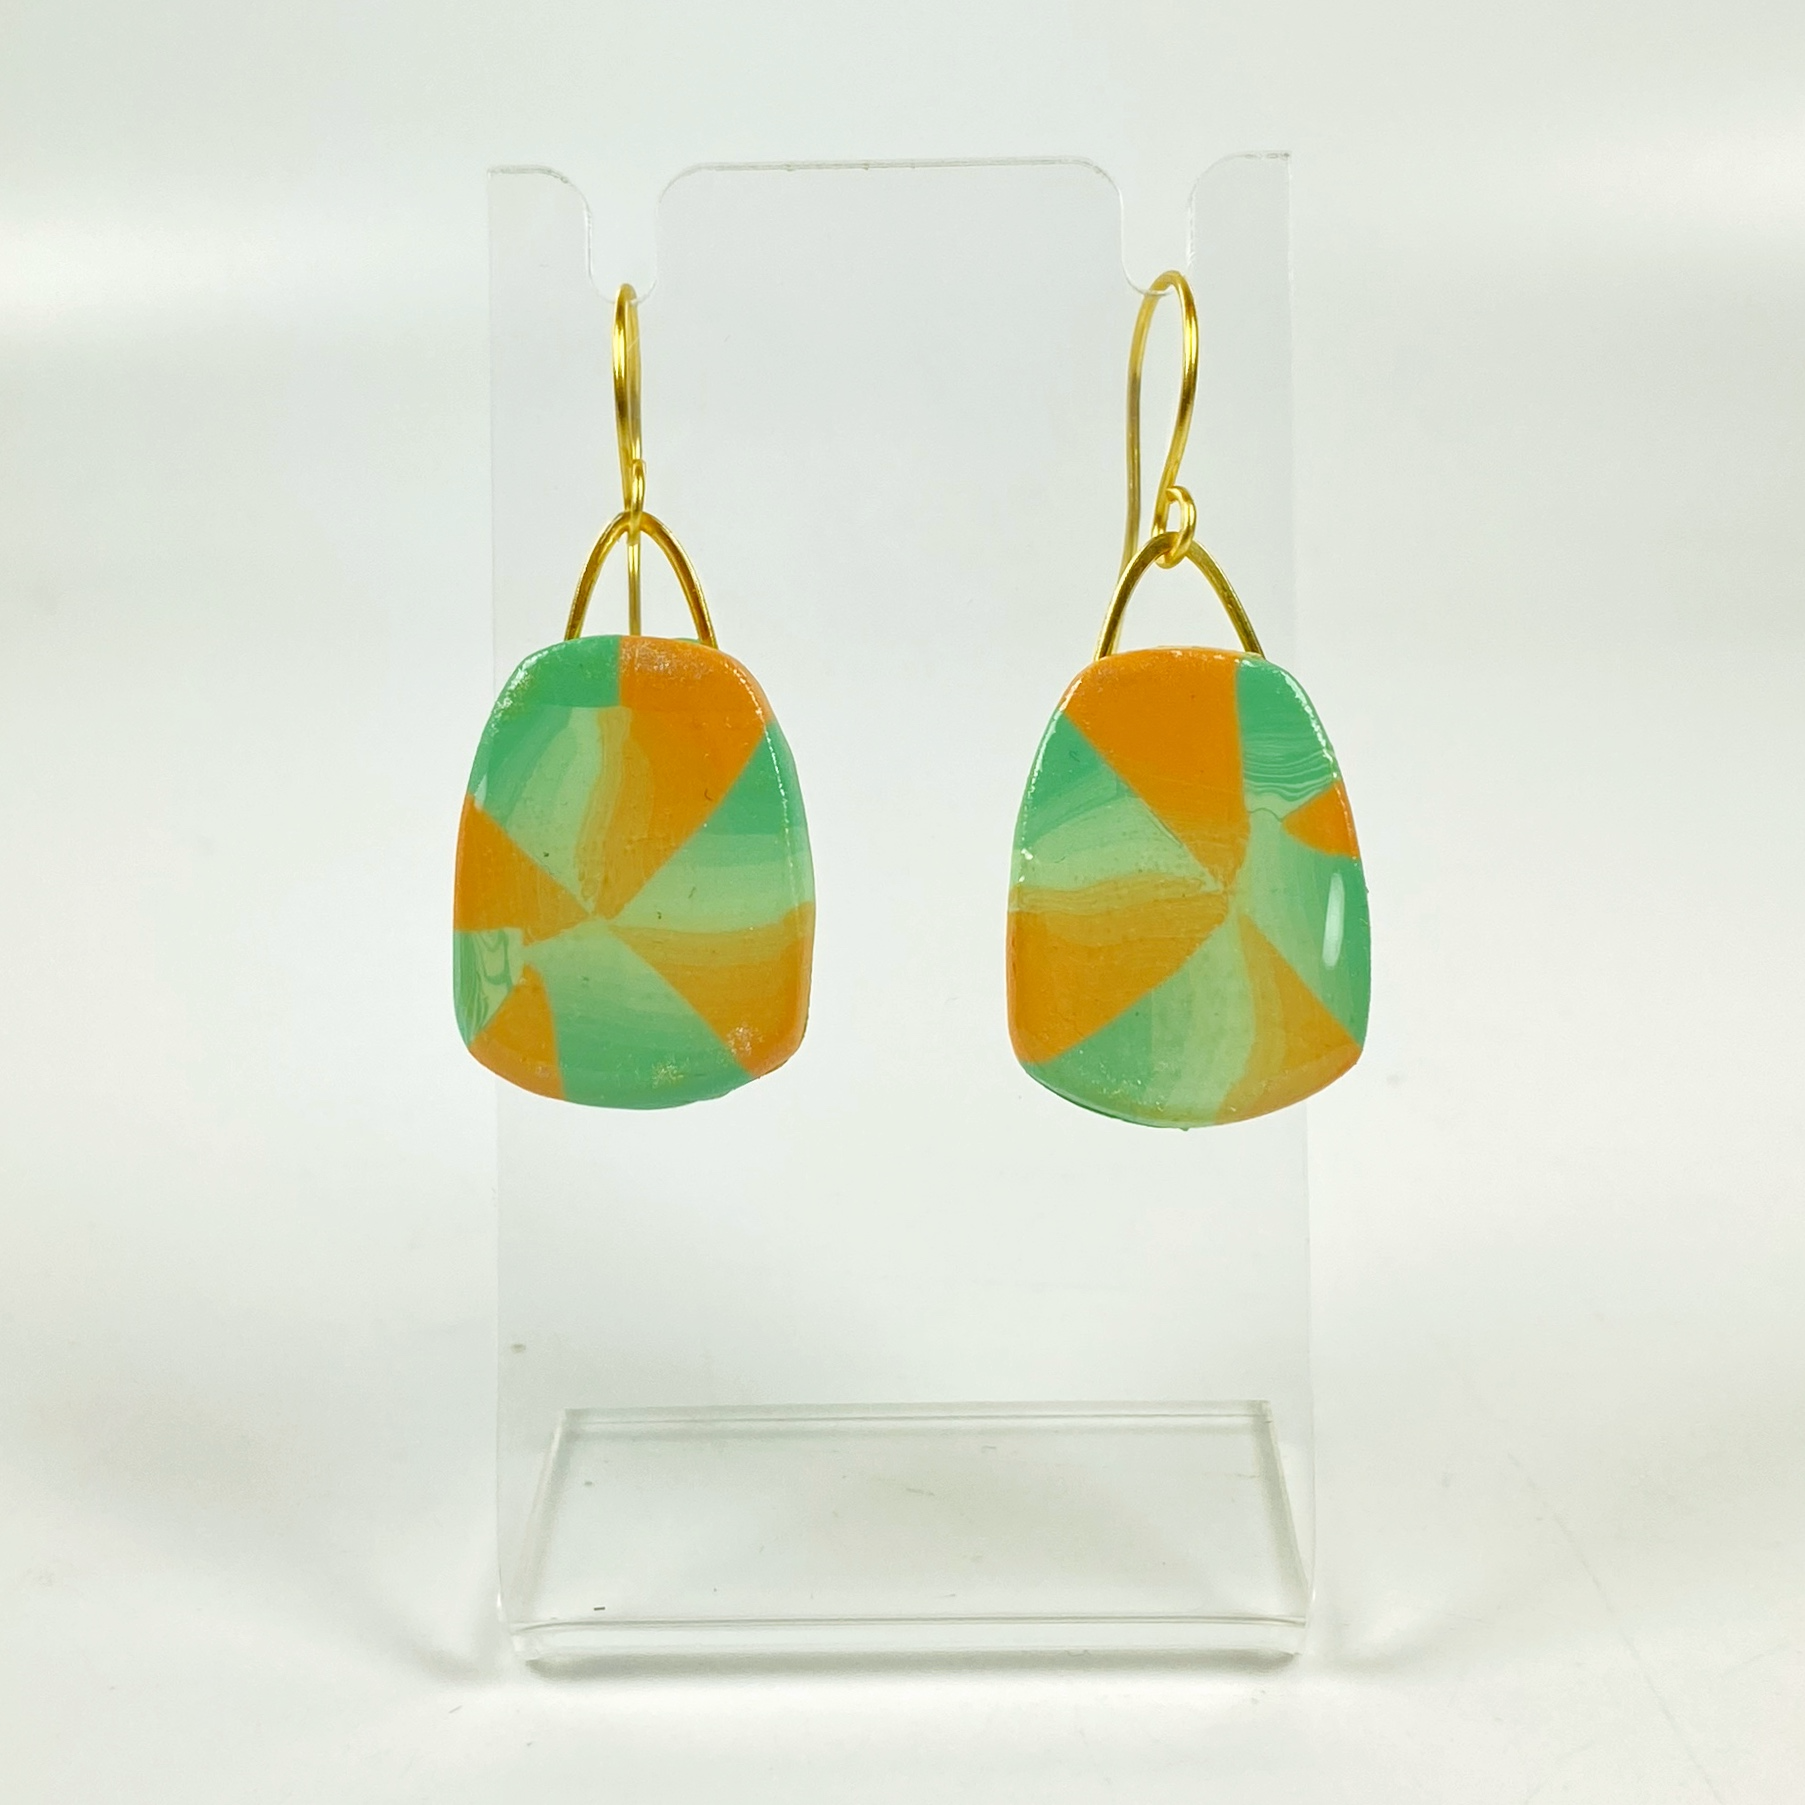 Desert Trapezoid Handmade Polymer Clay Earrings on a small acrylic stand